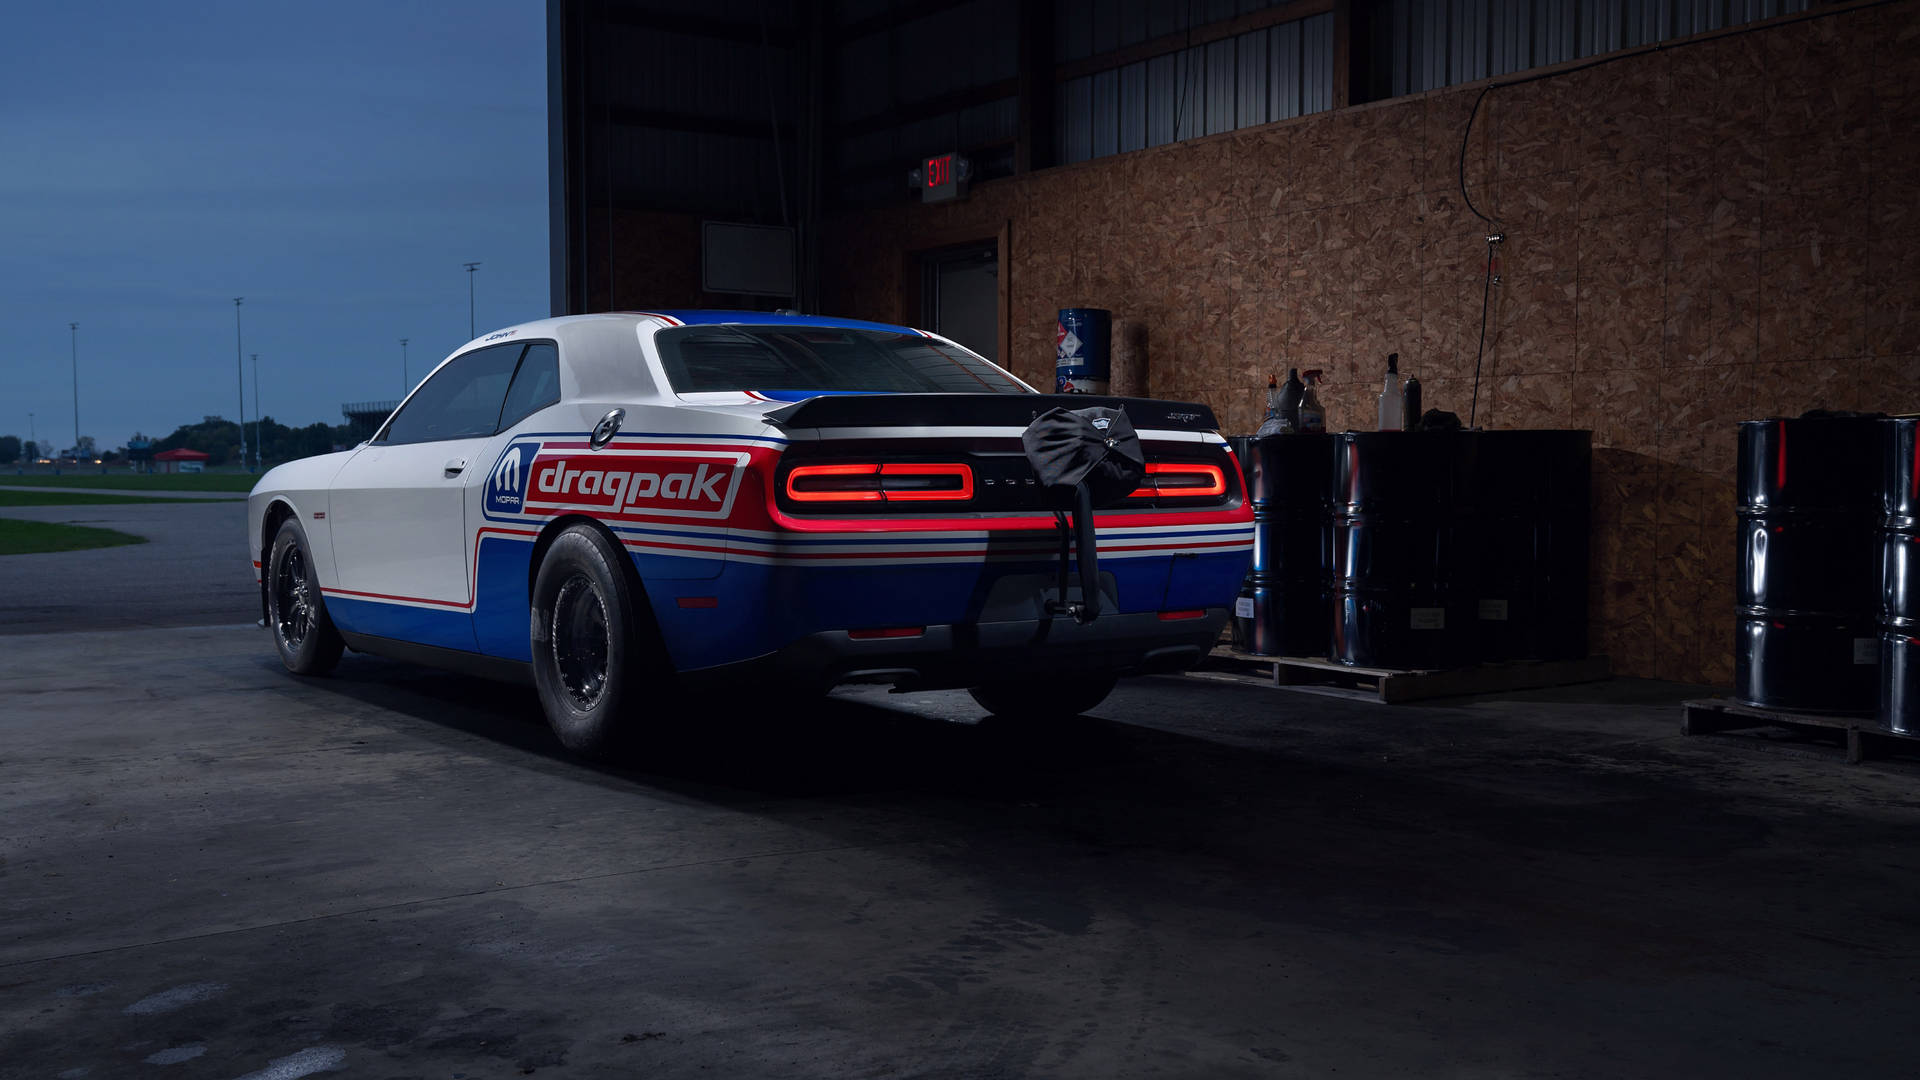 Dodge Challenger With Drag Pack Decal